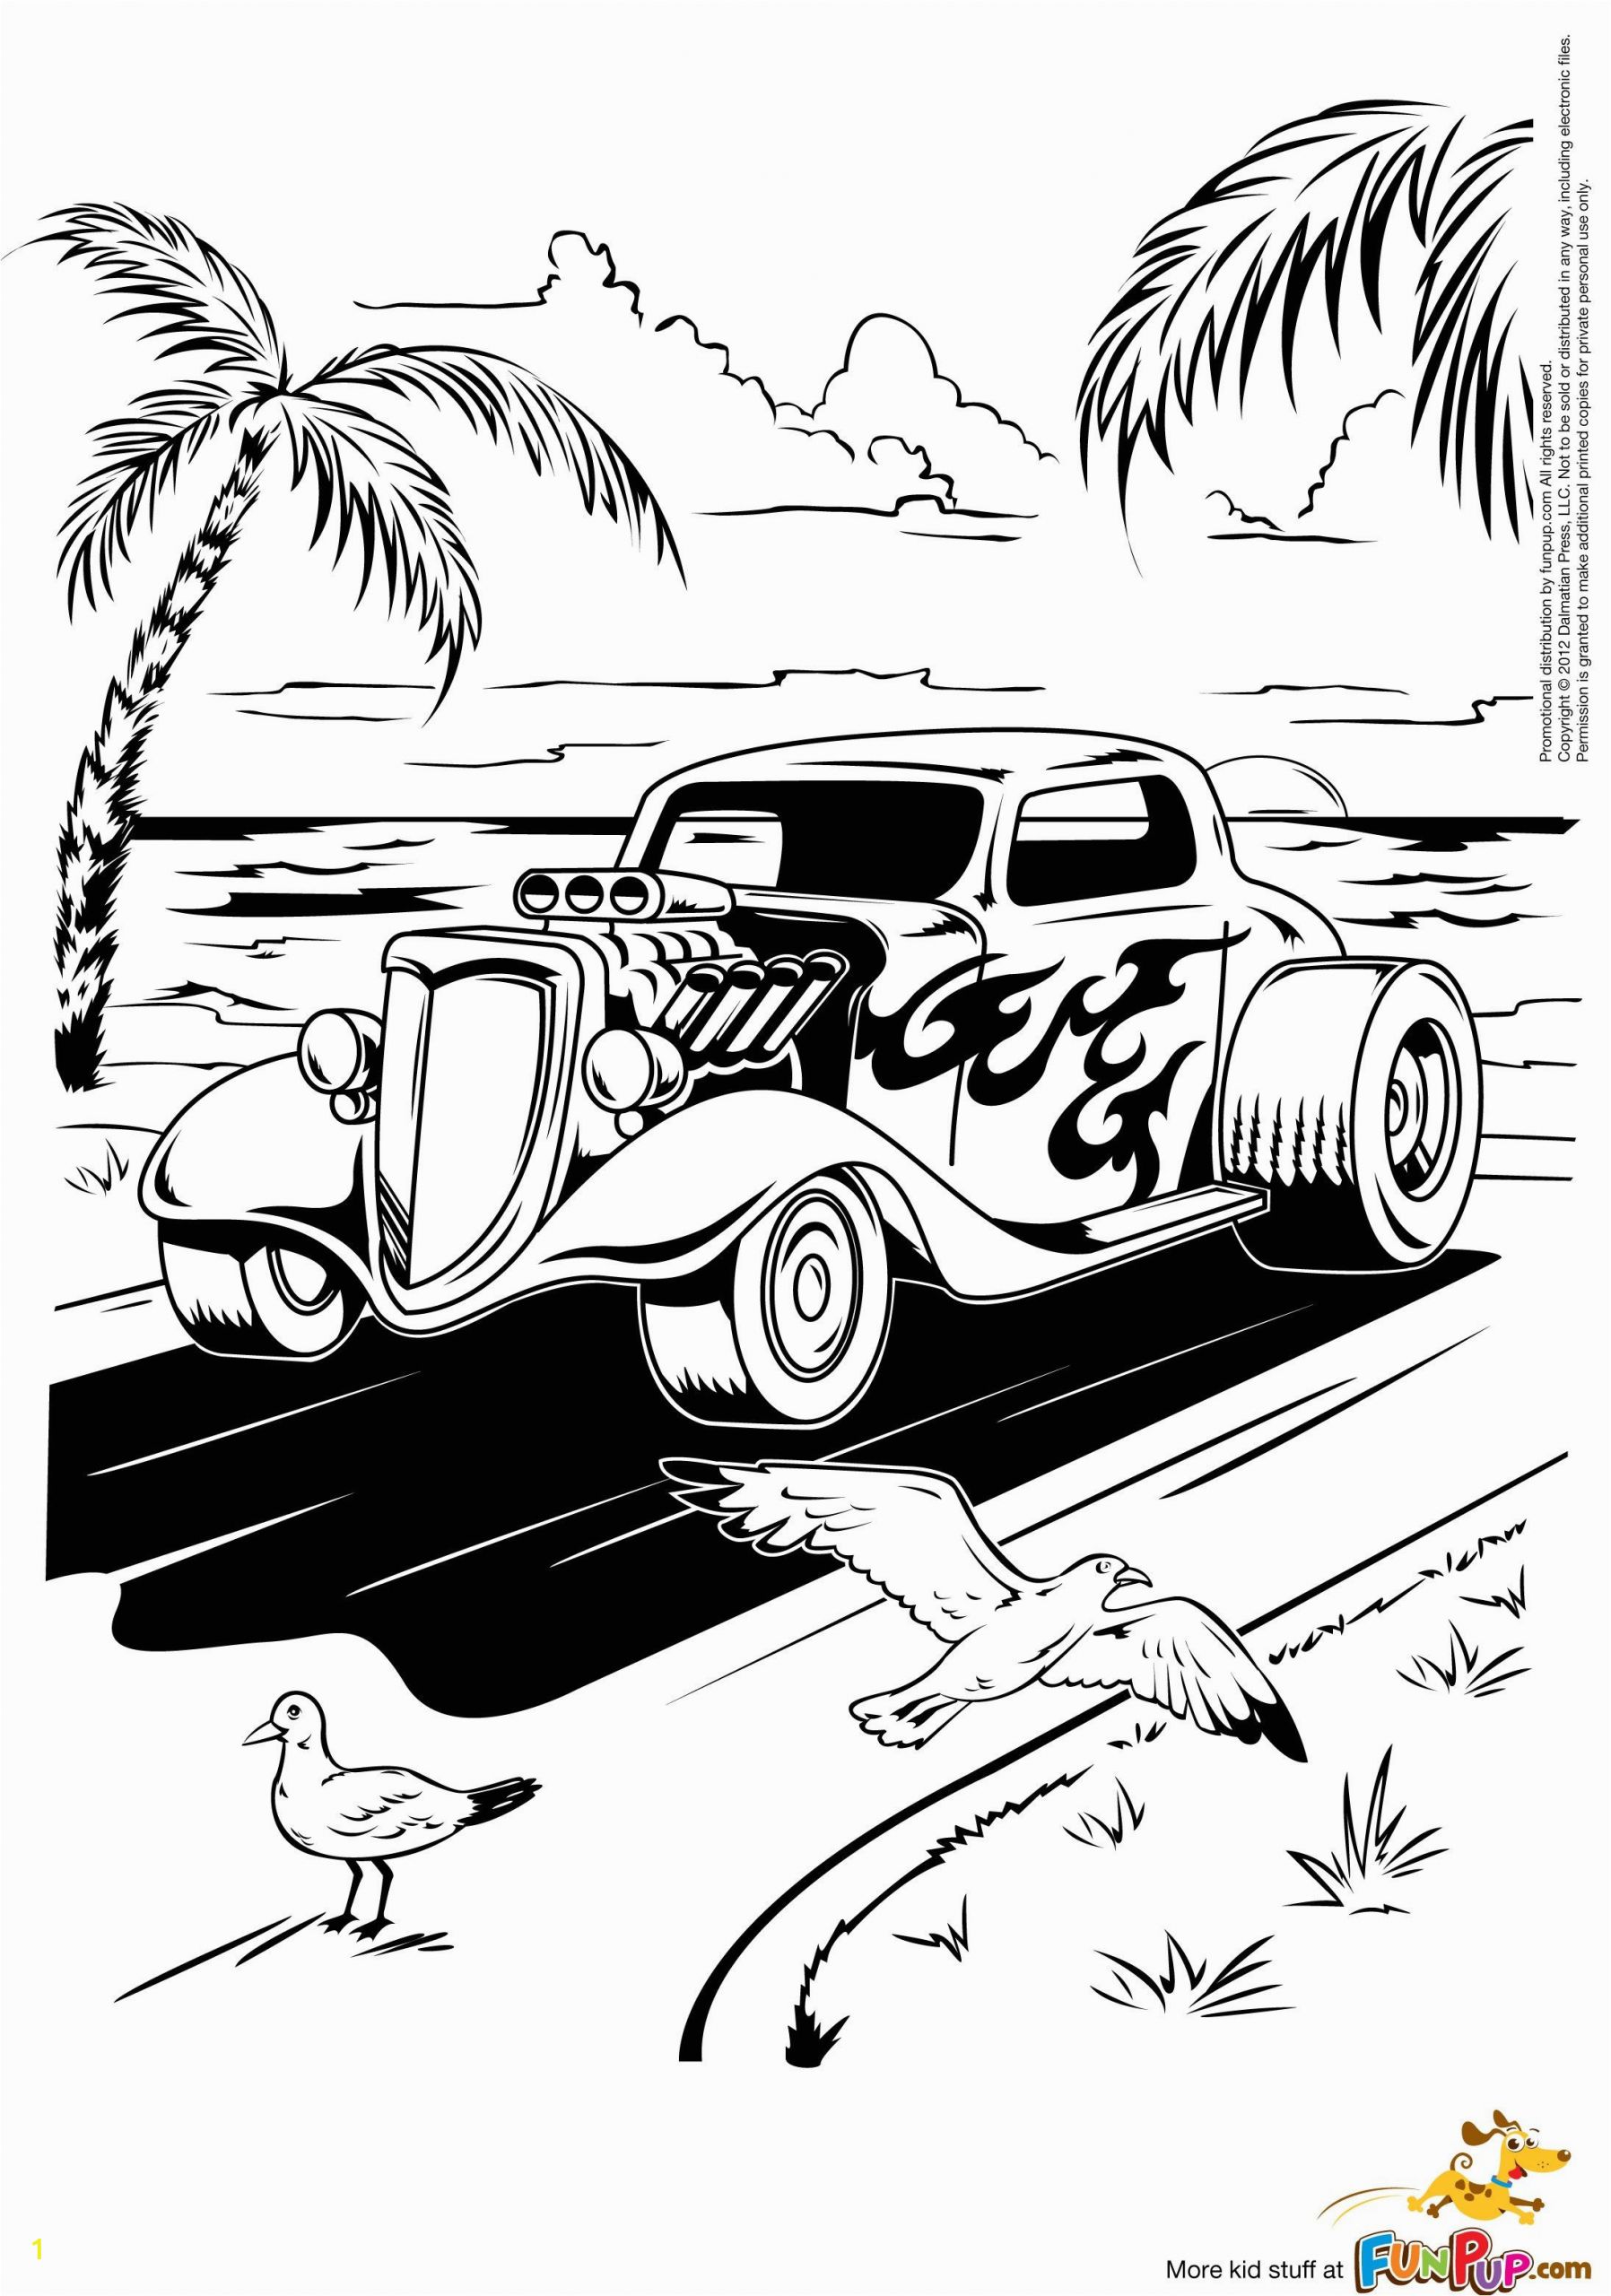 Free Printable Hot Rod Coloring Pages Hot Rod Coloring Page with Images